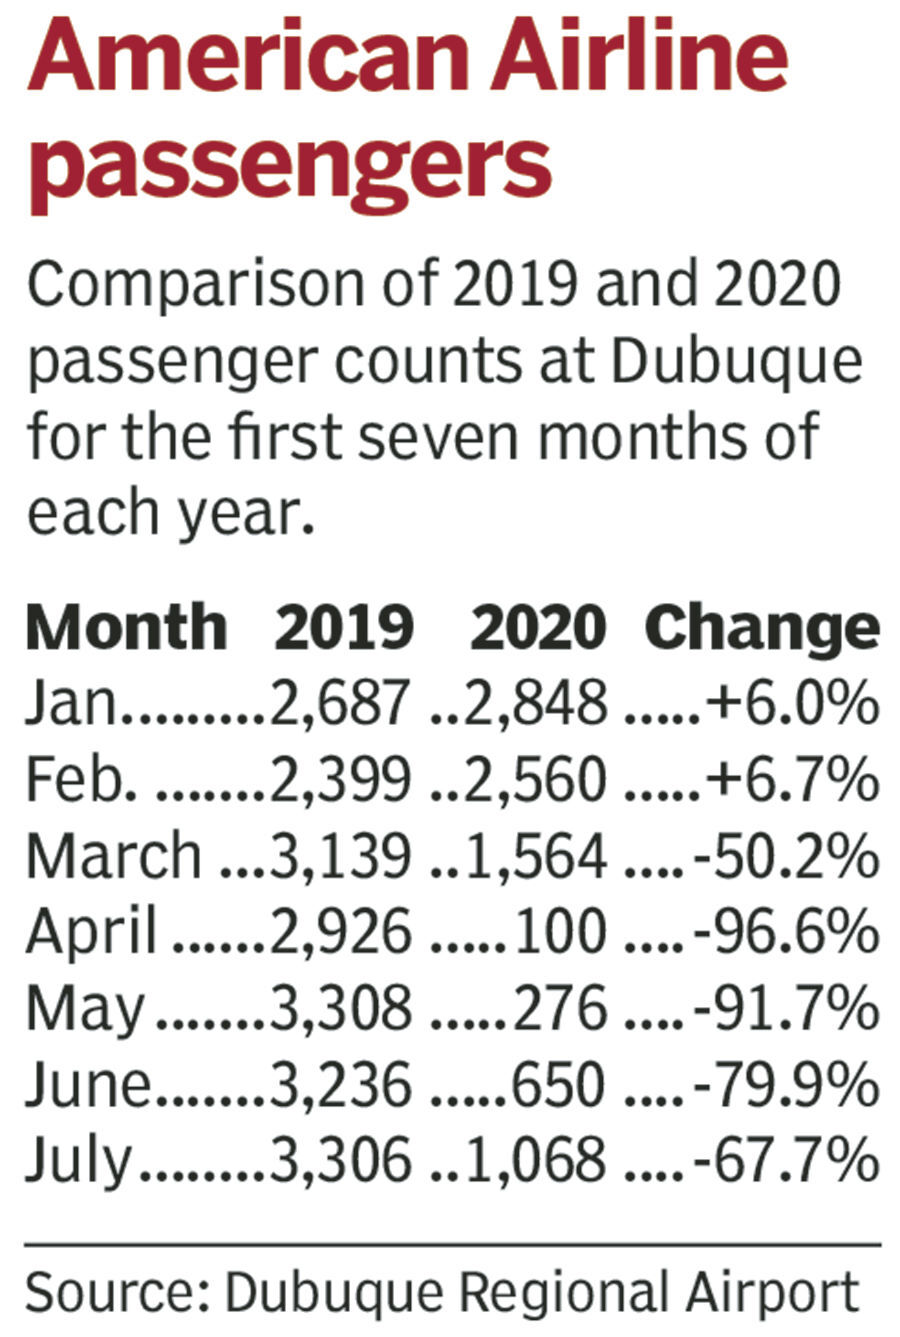 Comparison of 2019 and 2020 passenger counts for American Airlines at the Dubuque Regional Airport for the first seven months of each year. PHOTO CREDIT: By Mike Day
mike.day@thmedia.com